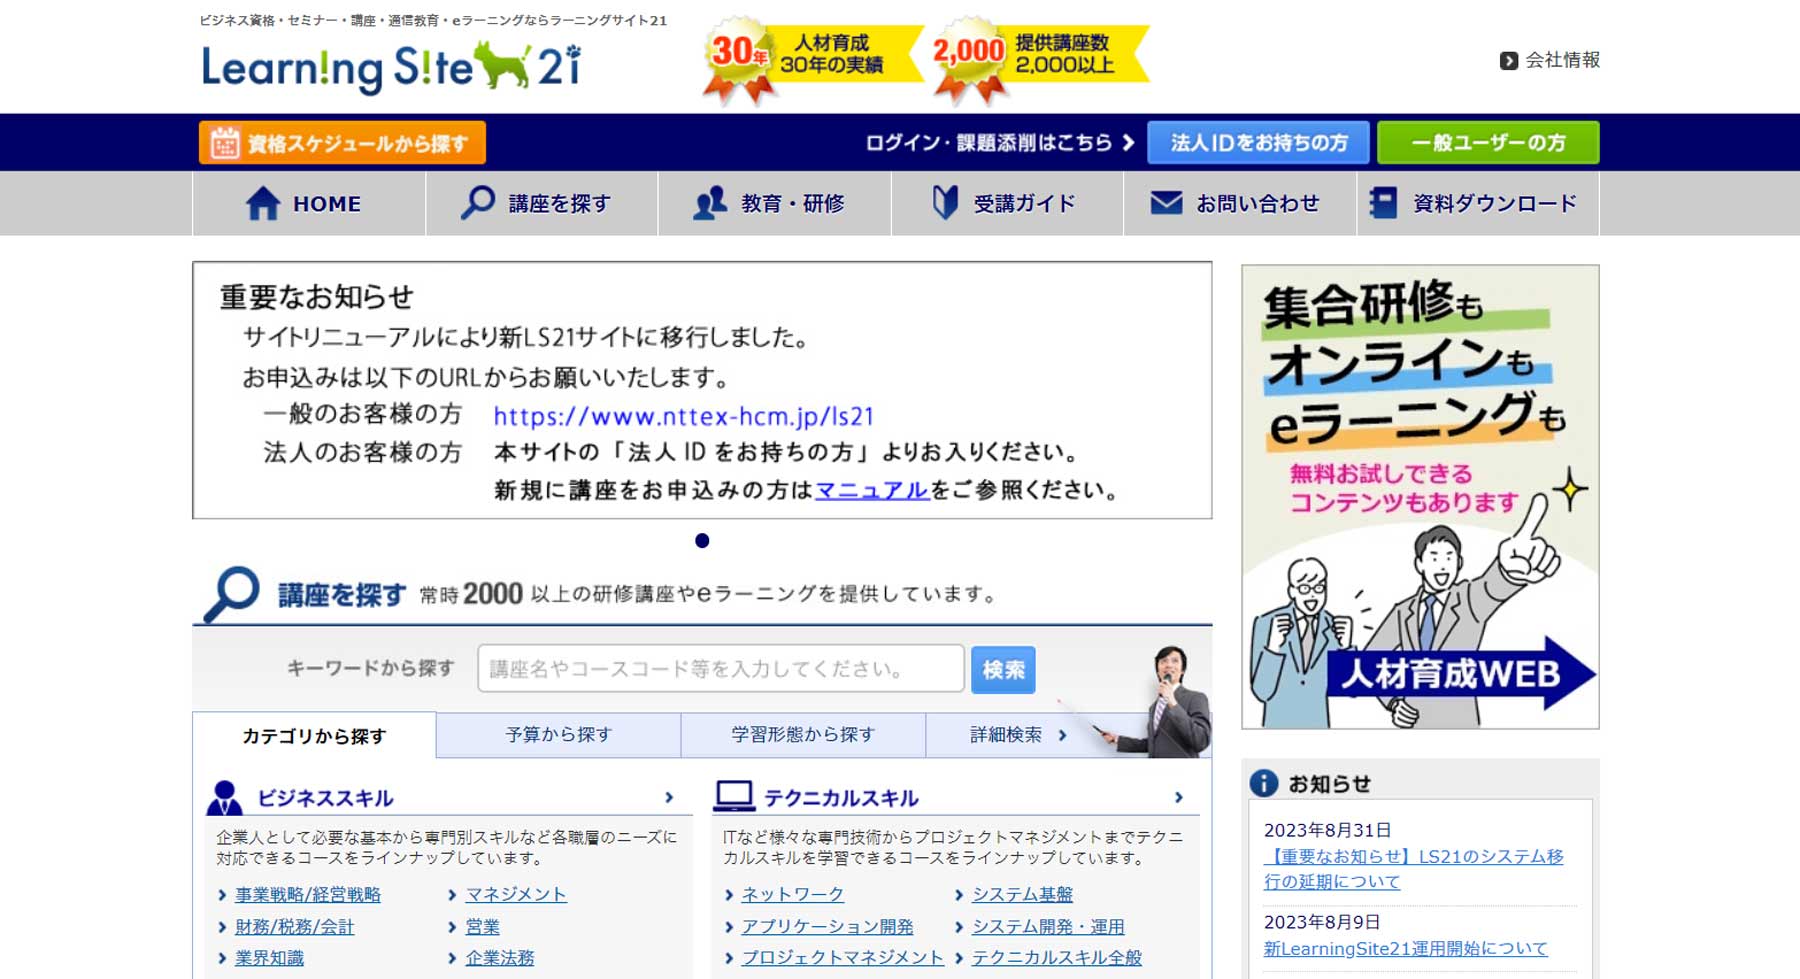 Learning Site21公式Webサイト